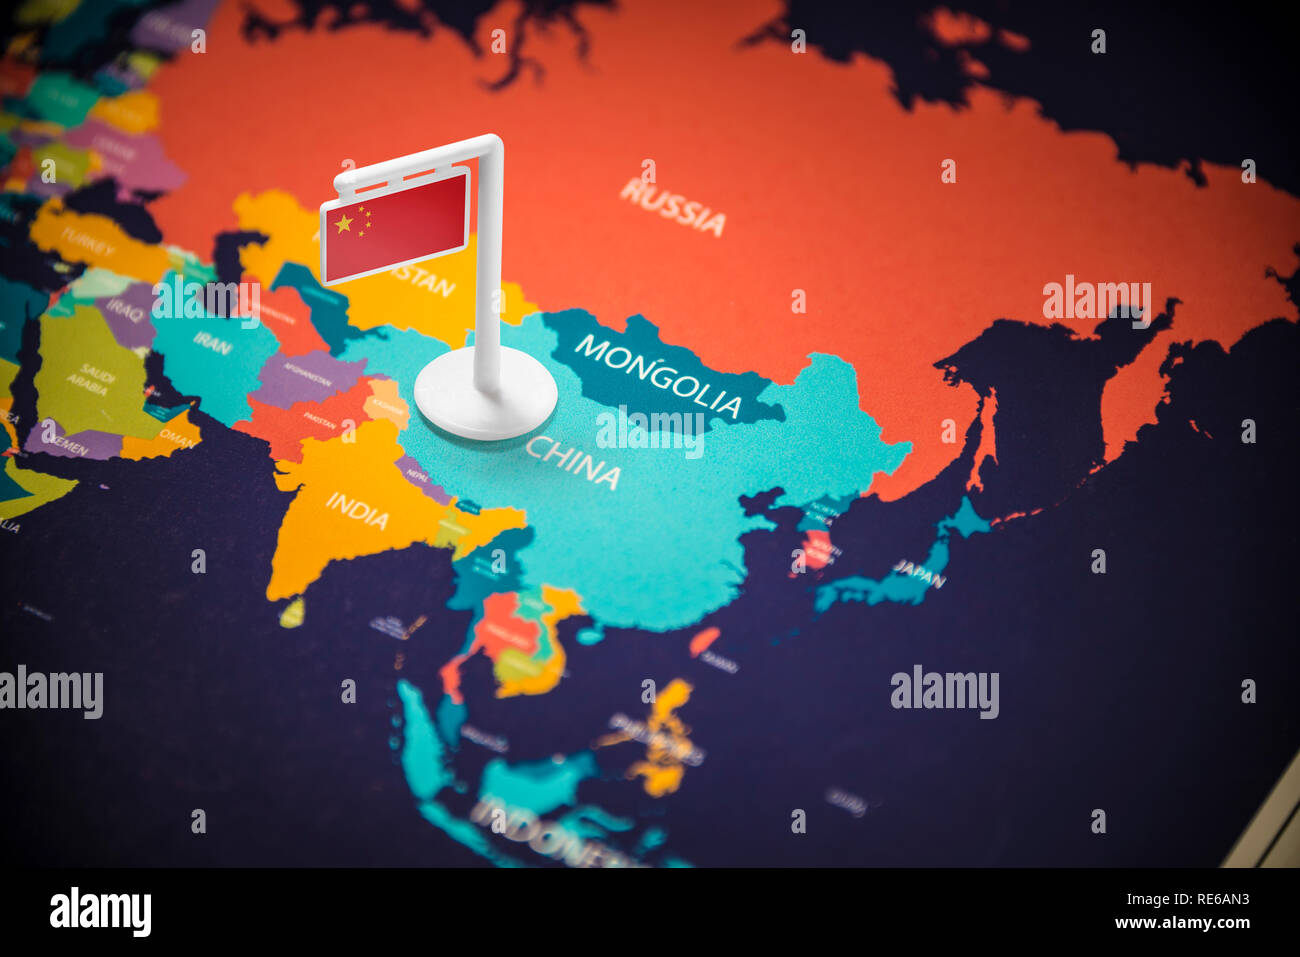 China marked with a flag on the map Stock Photo